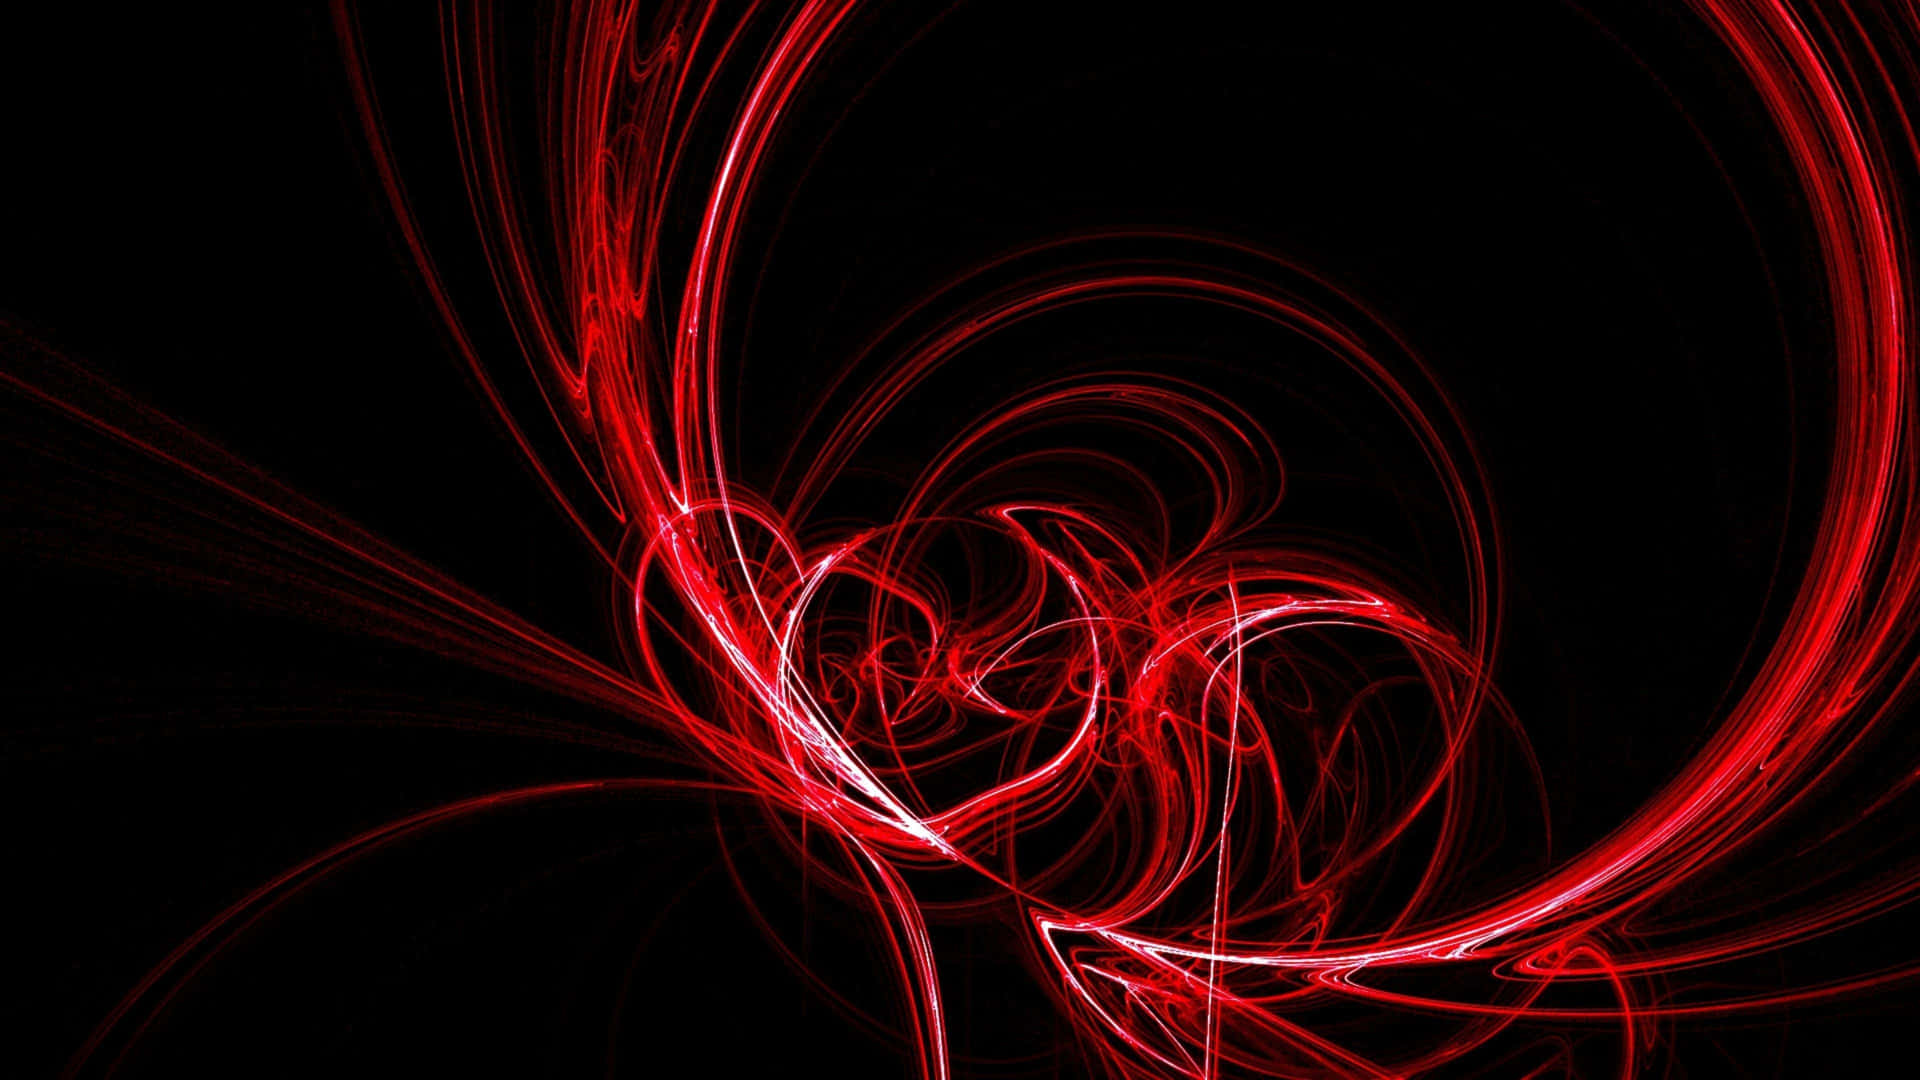 Turn up the energy with 4K Red Neon Wallpaper